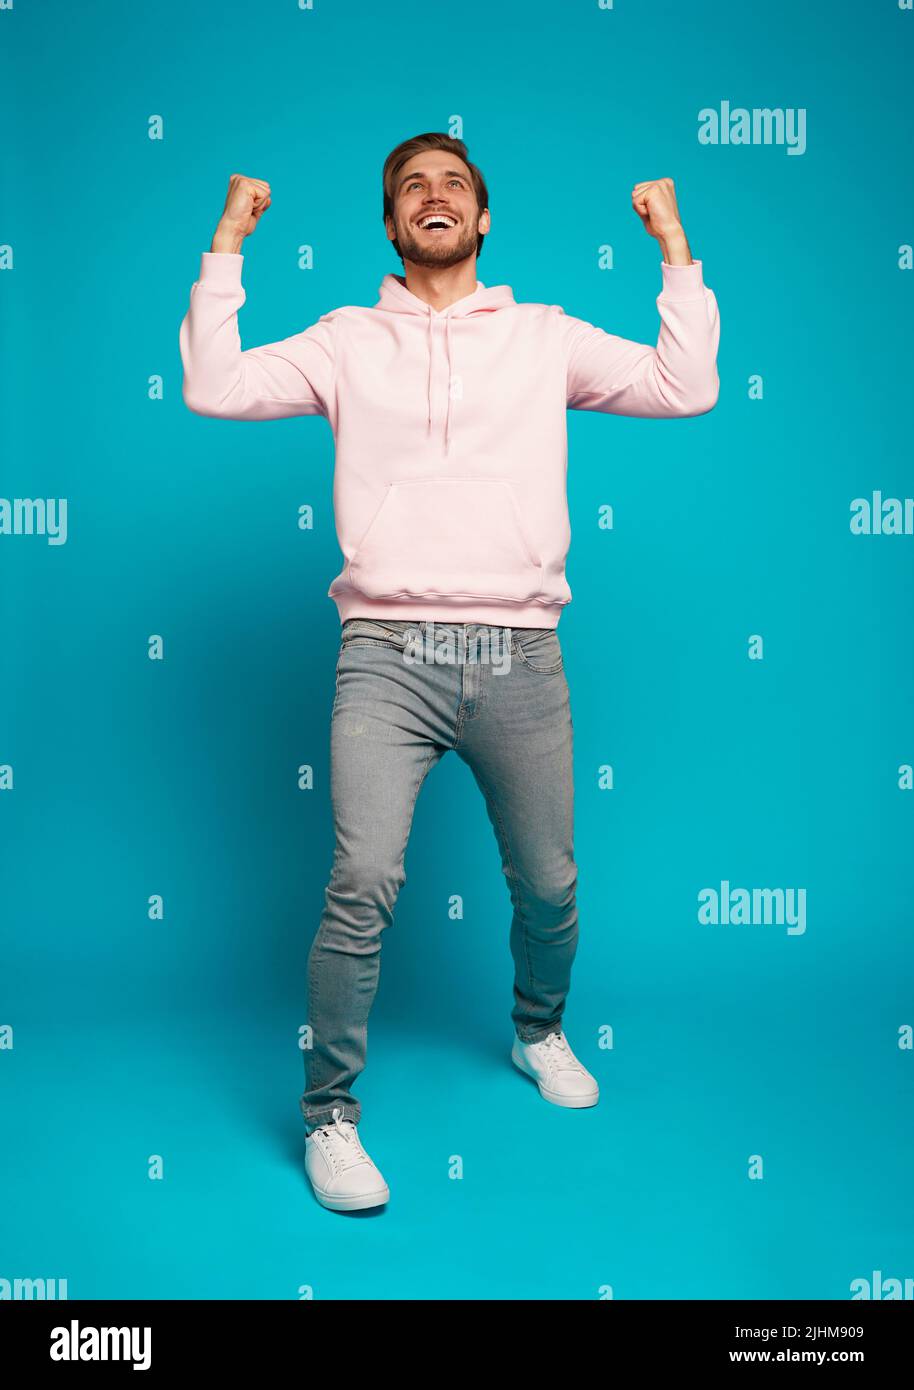 Full length of a cheerful young man standing and celebrating success isolated over light blue background Stock Photo